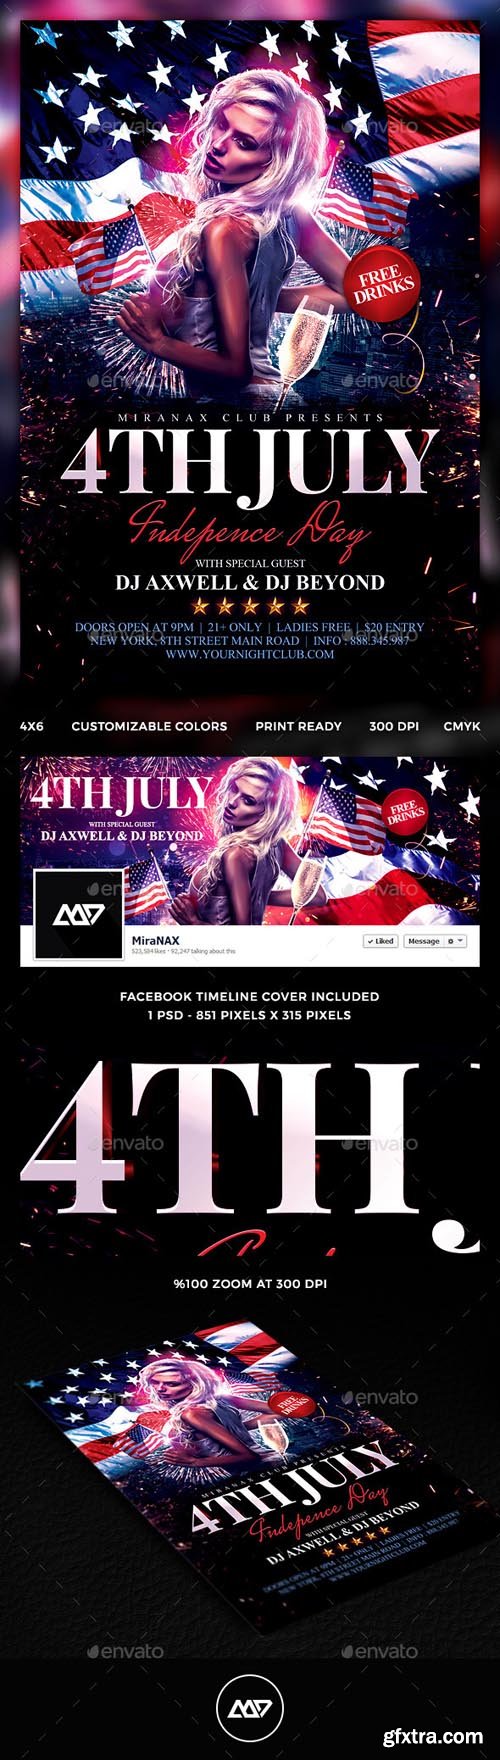 GR - 4th of July Flyer Template PSD 11601707